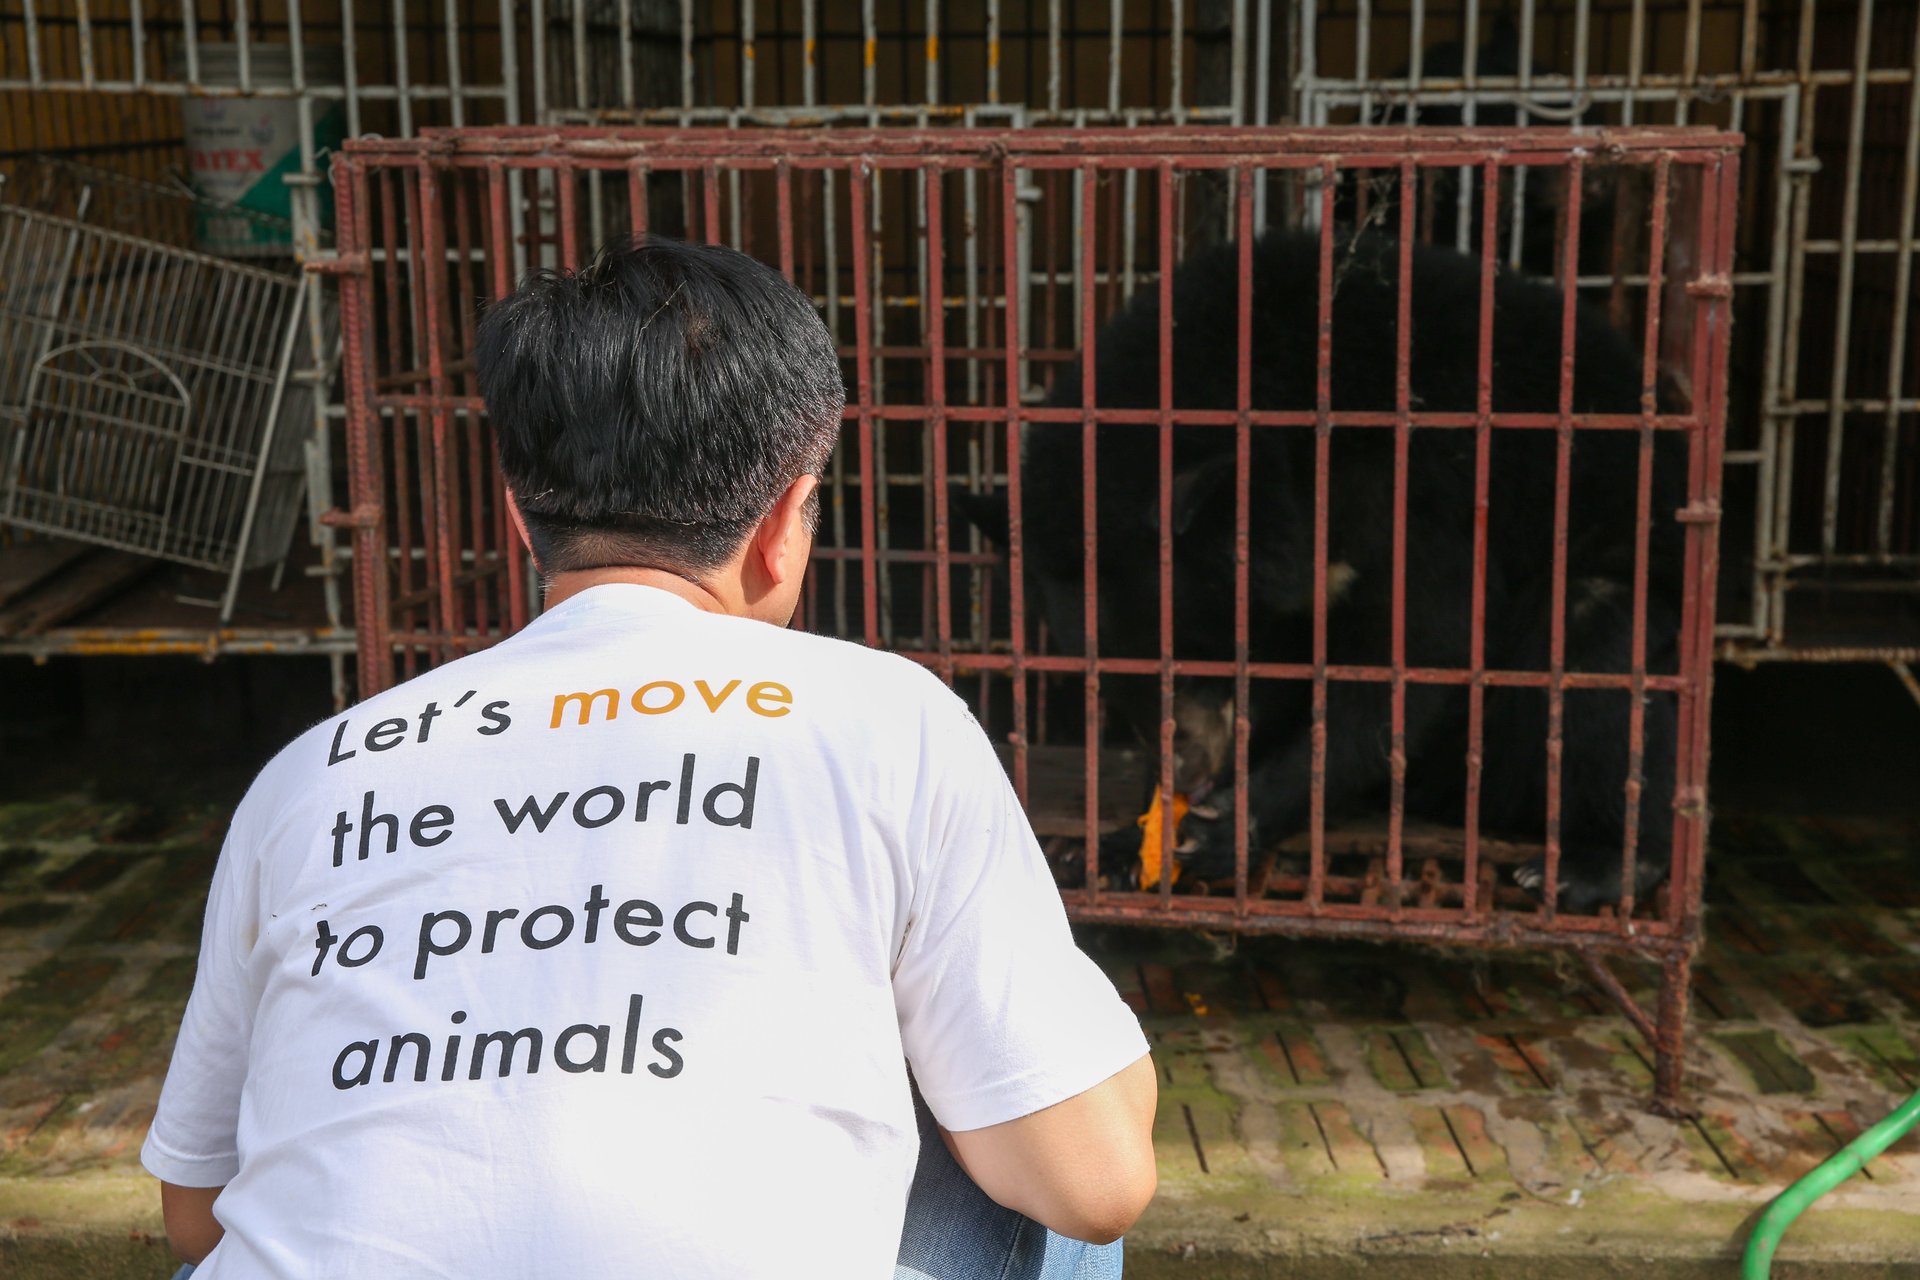 A World Animal Protection member of staff looking at a caged bear. The member of staff is wearing a WAP branded t-shirt.